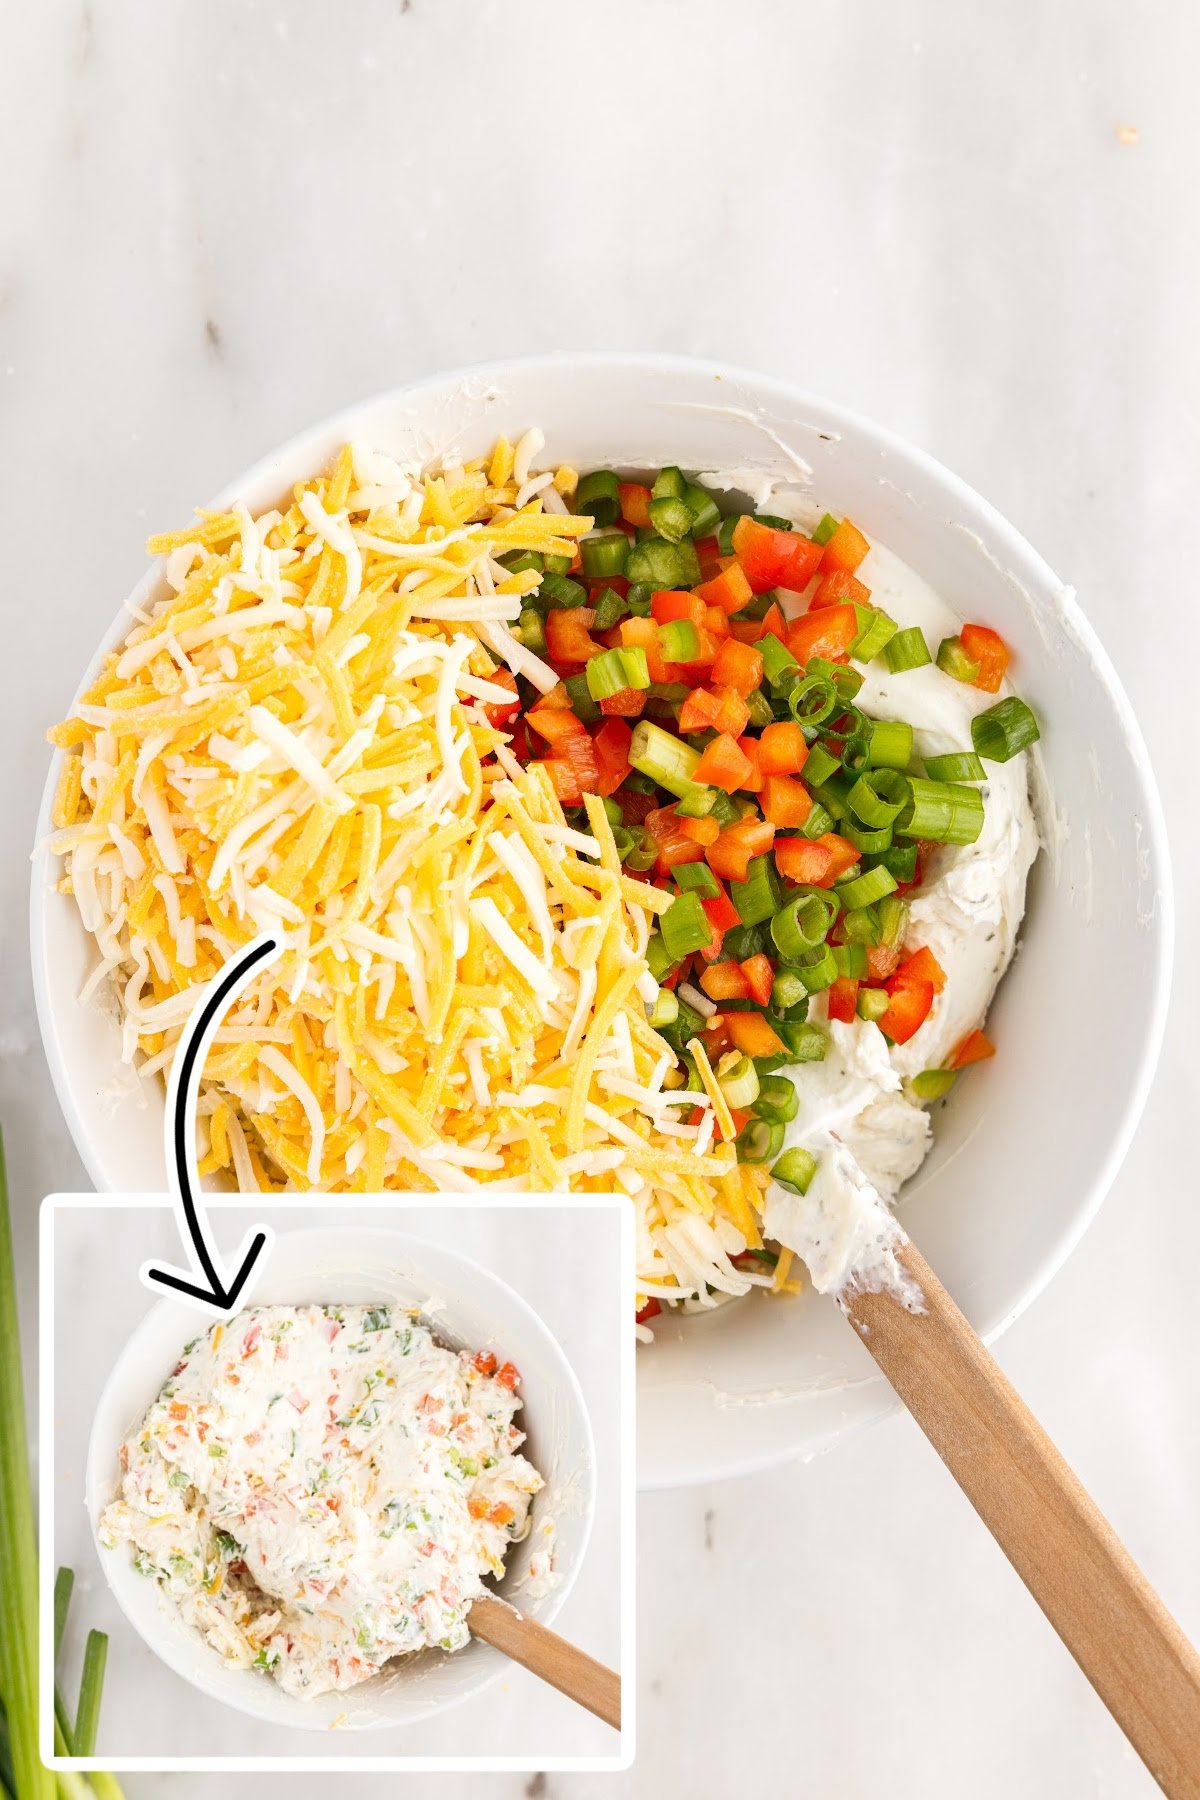 Mixing the cream cheese, veggies, and other cheese in a white mixing bowl.